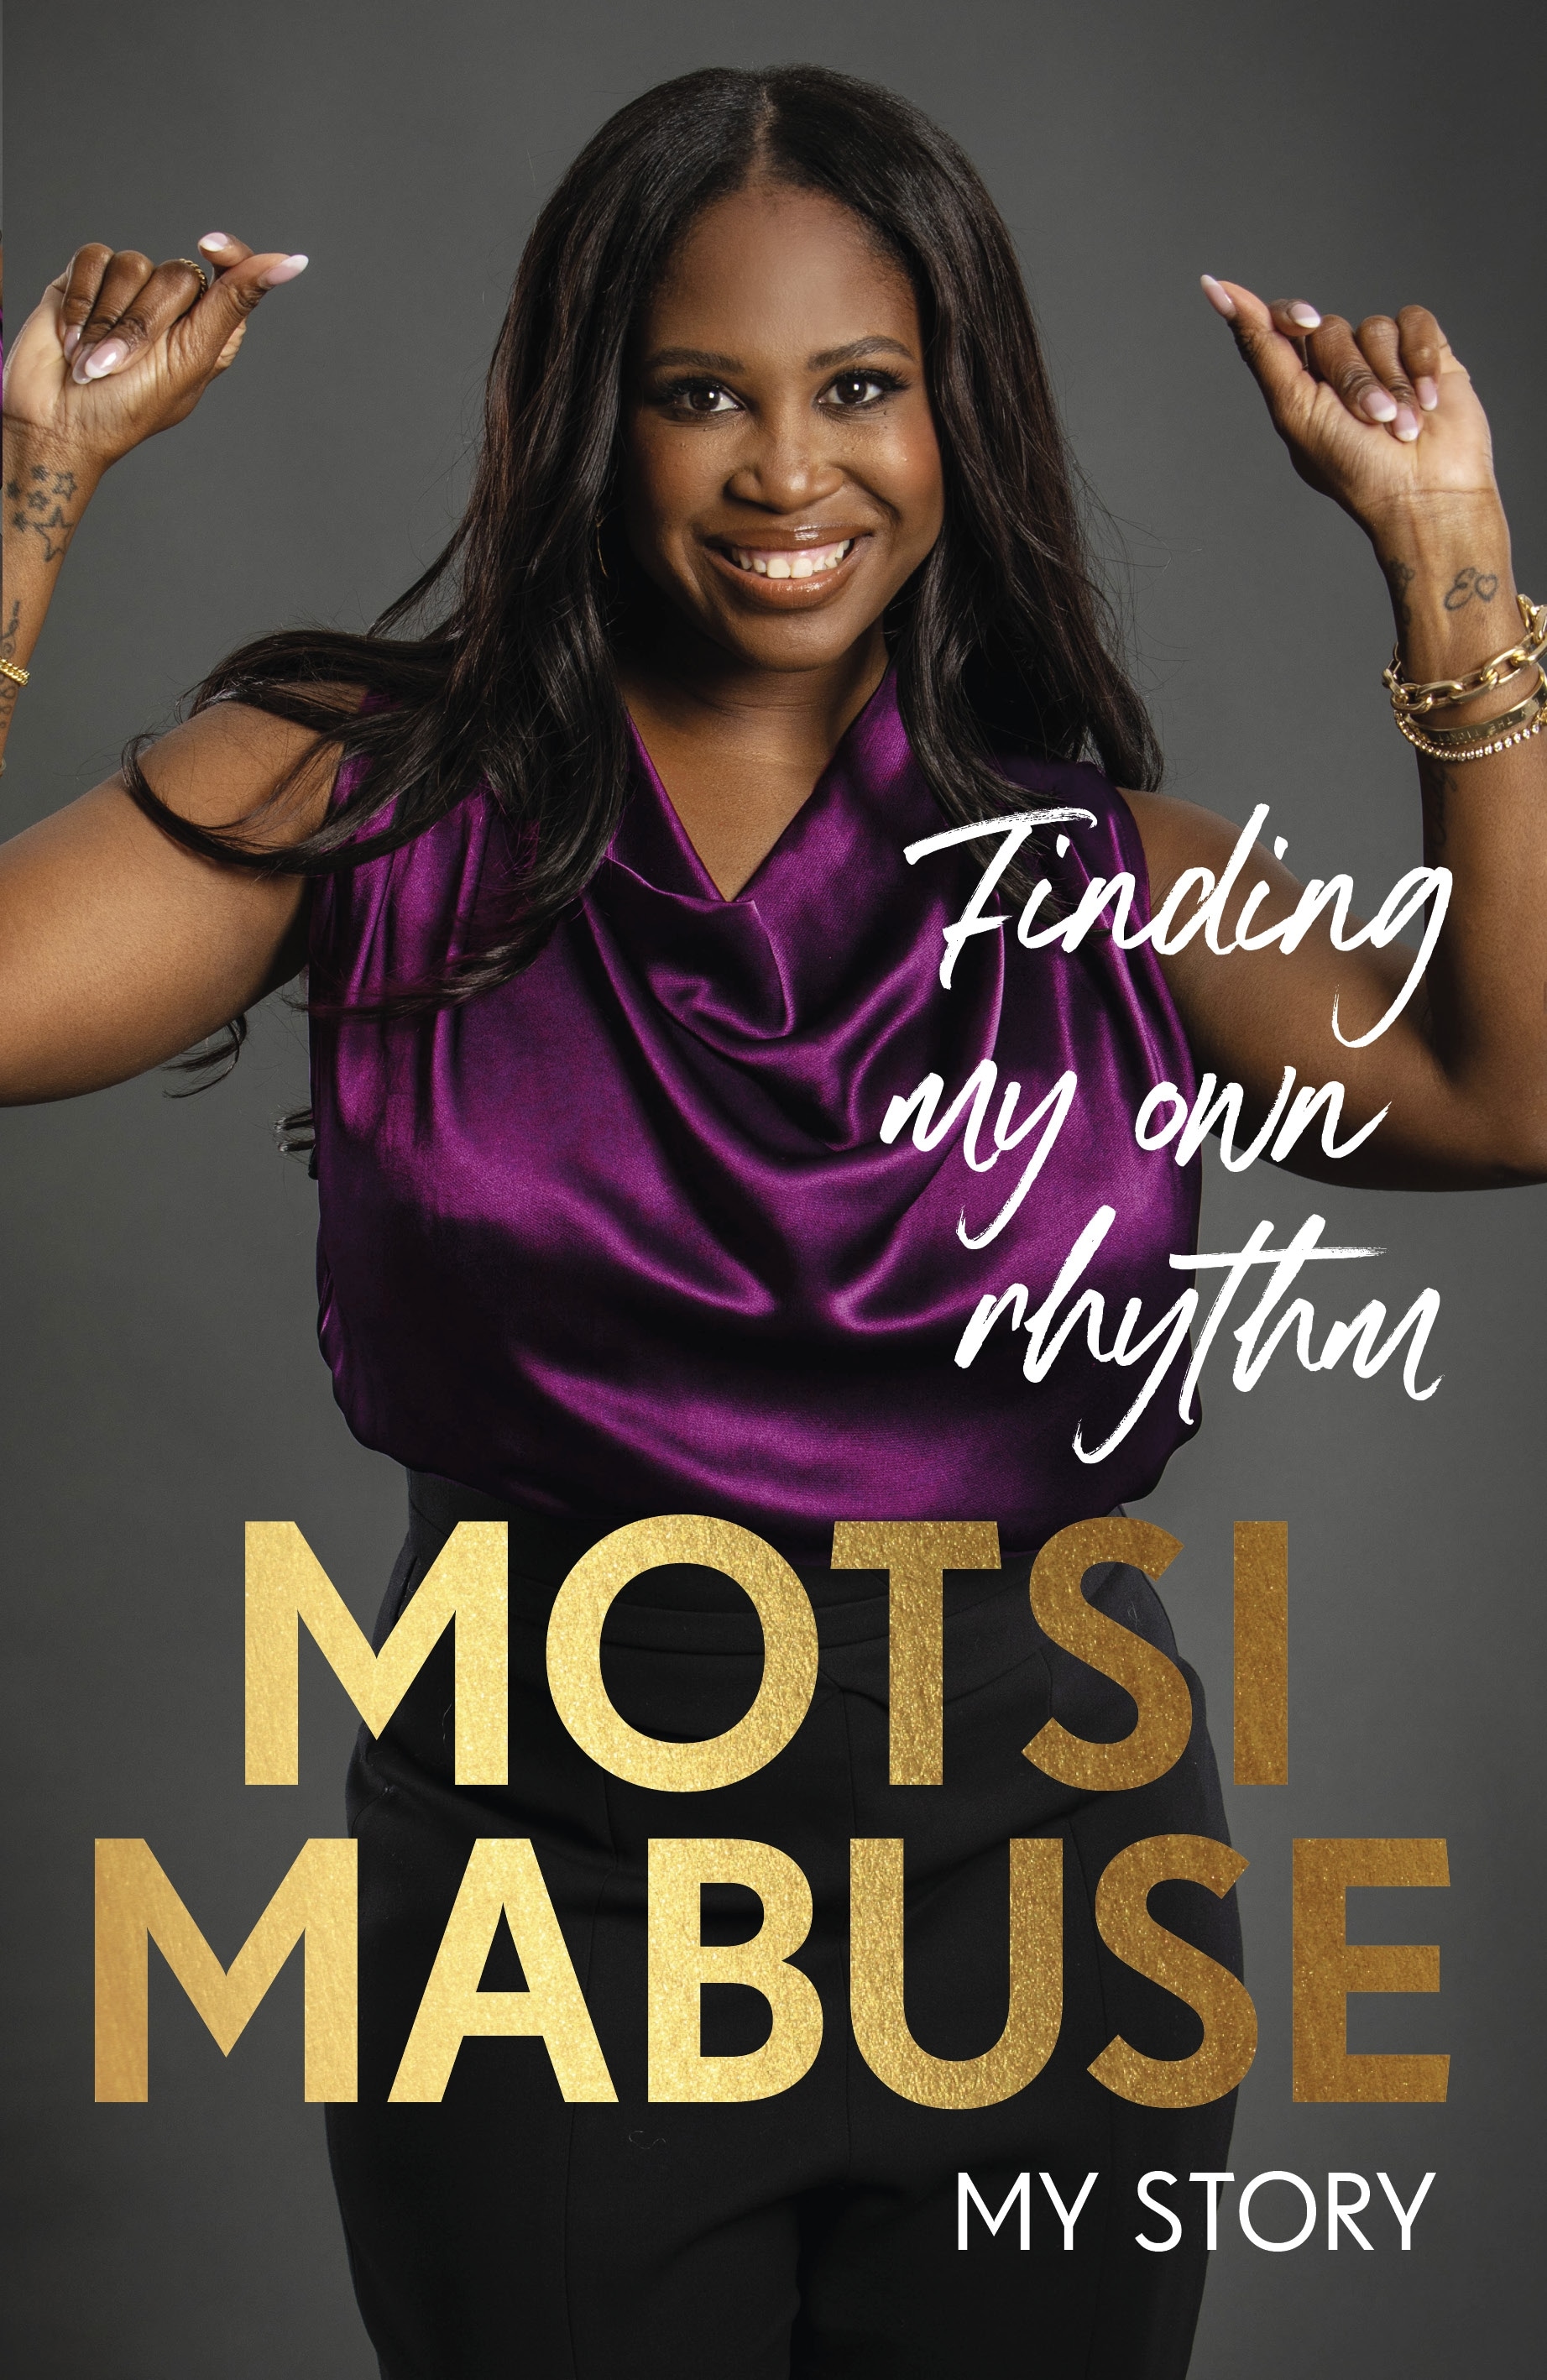 Book “Finding My Own Rhythm” by Motsi Mabuse — September 8, 2022